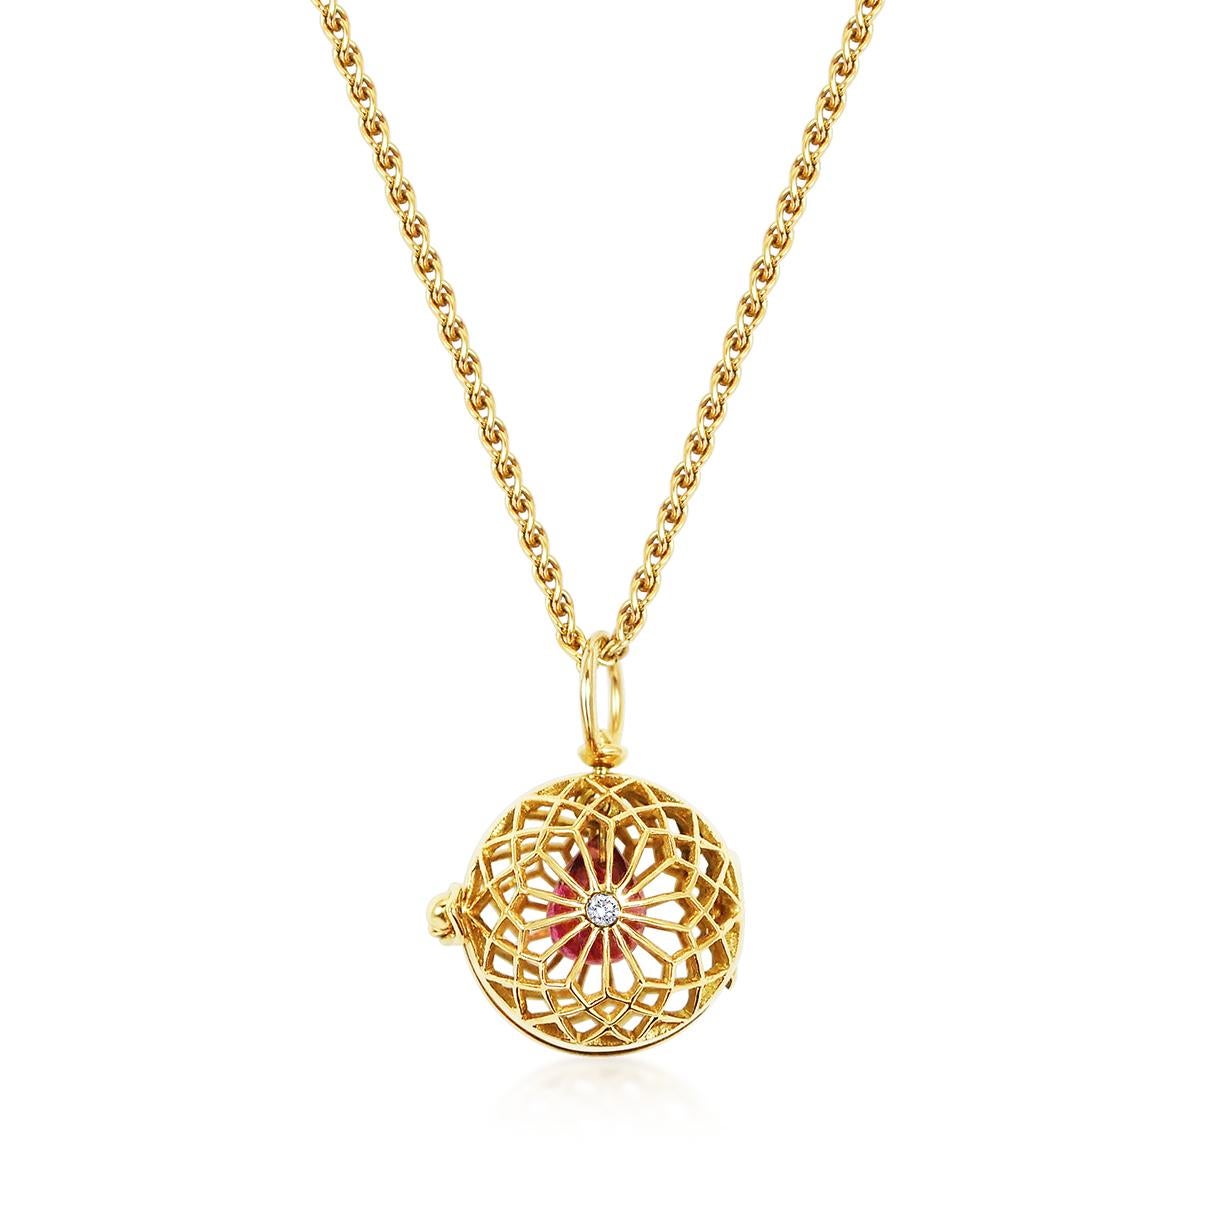 Handcrafted 1,15 Carats Pink Tourmaline & Diamonds 18 Karat Yellow Gold Pendant Necklace. Inspired by the gesture of giving someone your heart and for them to keep it safe. A drop of Pink Tourmaline swings in our hand pierced yellow gold cage